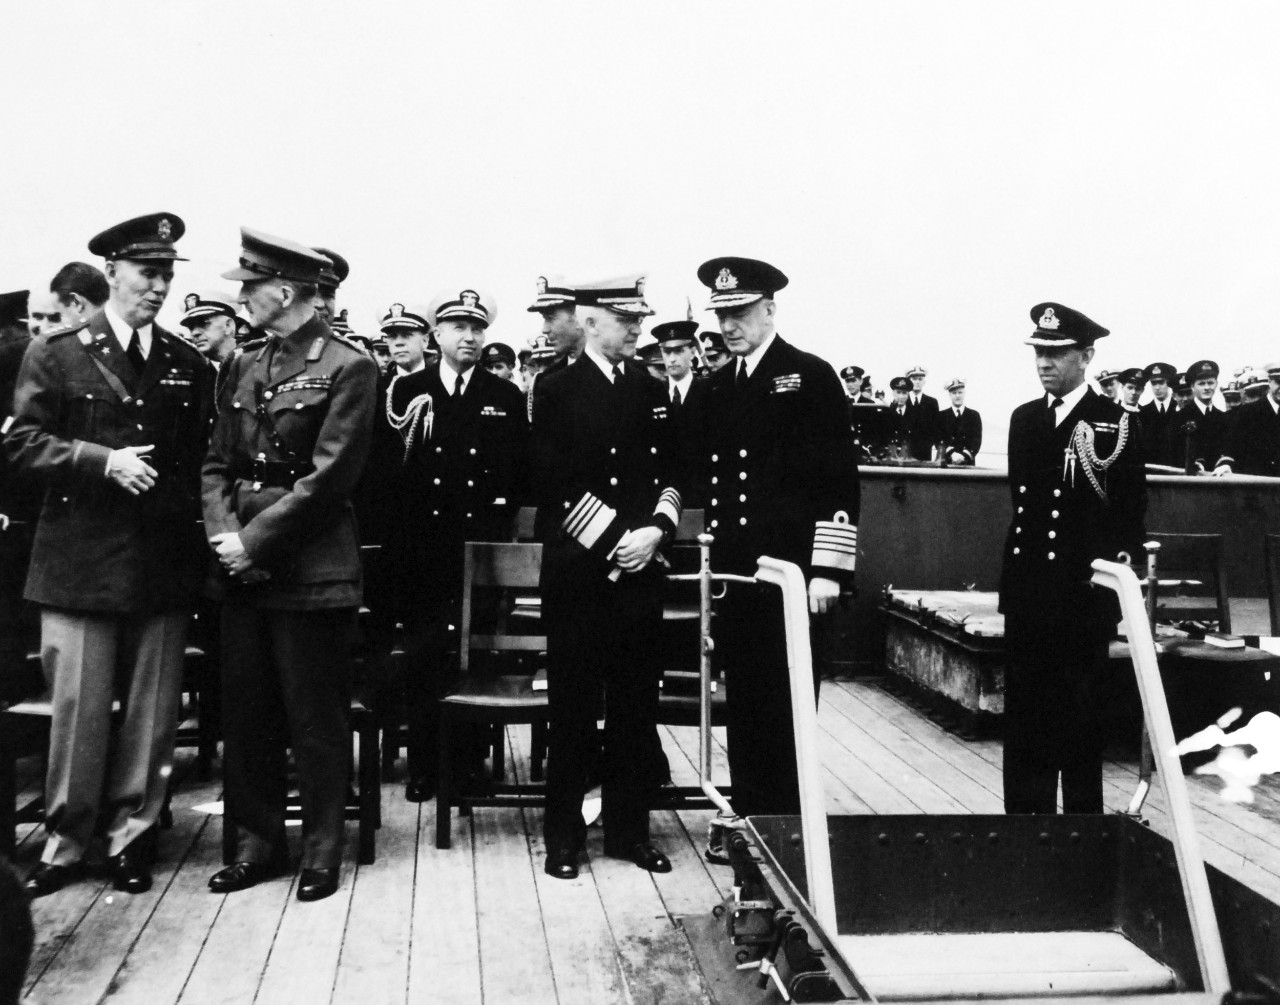 80-G-26859: Atlantic Charter, August 1941.  Informal group on deck of Royal Navy battleship HMS Prince of Wales following church services during the Atlantic Charter meeting.  Standing, left to right:  General George C. Marshall; General Sir John Dill; Admiral Harold R. Stark; and Admiral Sir Dudley Pound.   Photograph released August 1941.   Official U.S. Navy Photograph, now in the collections of the National Archives.  (2016/03/22).